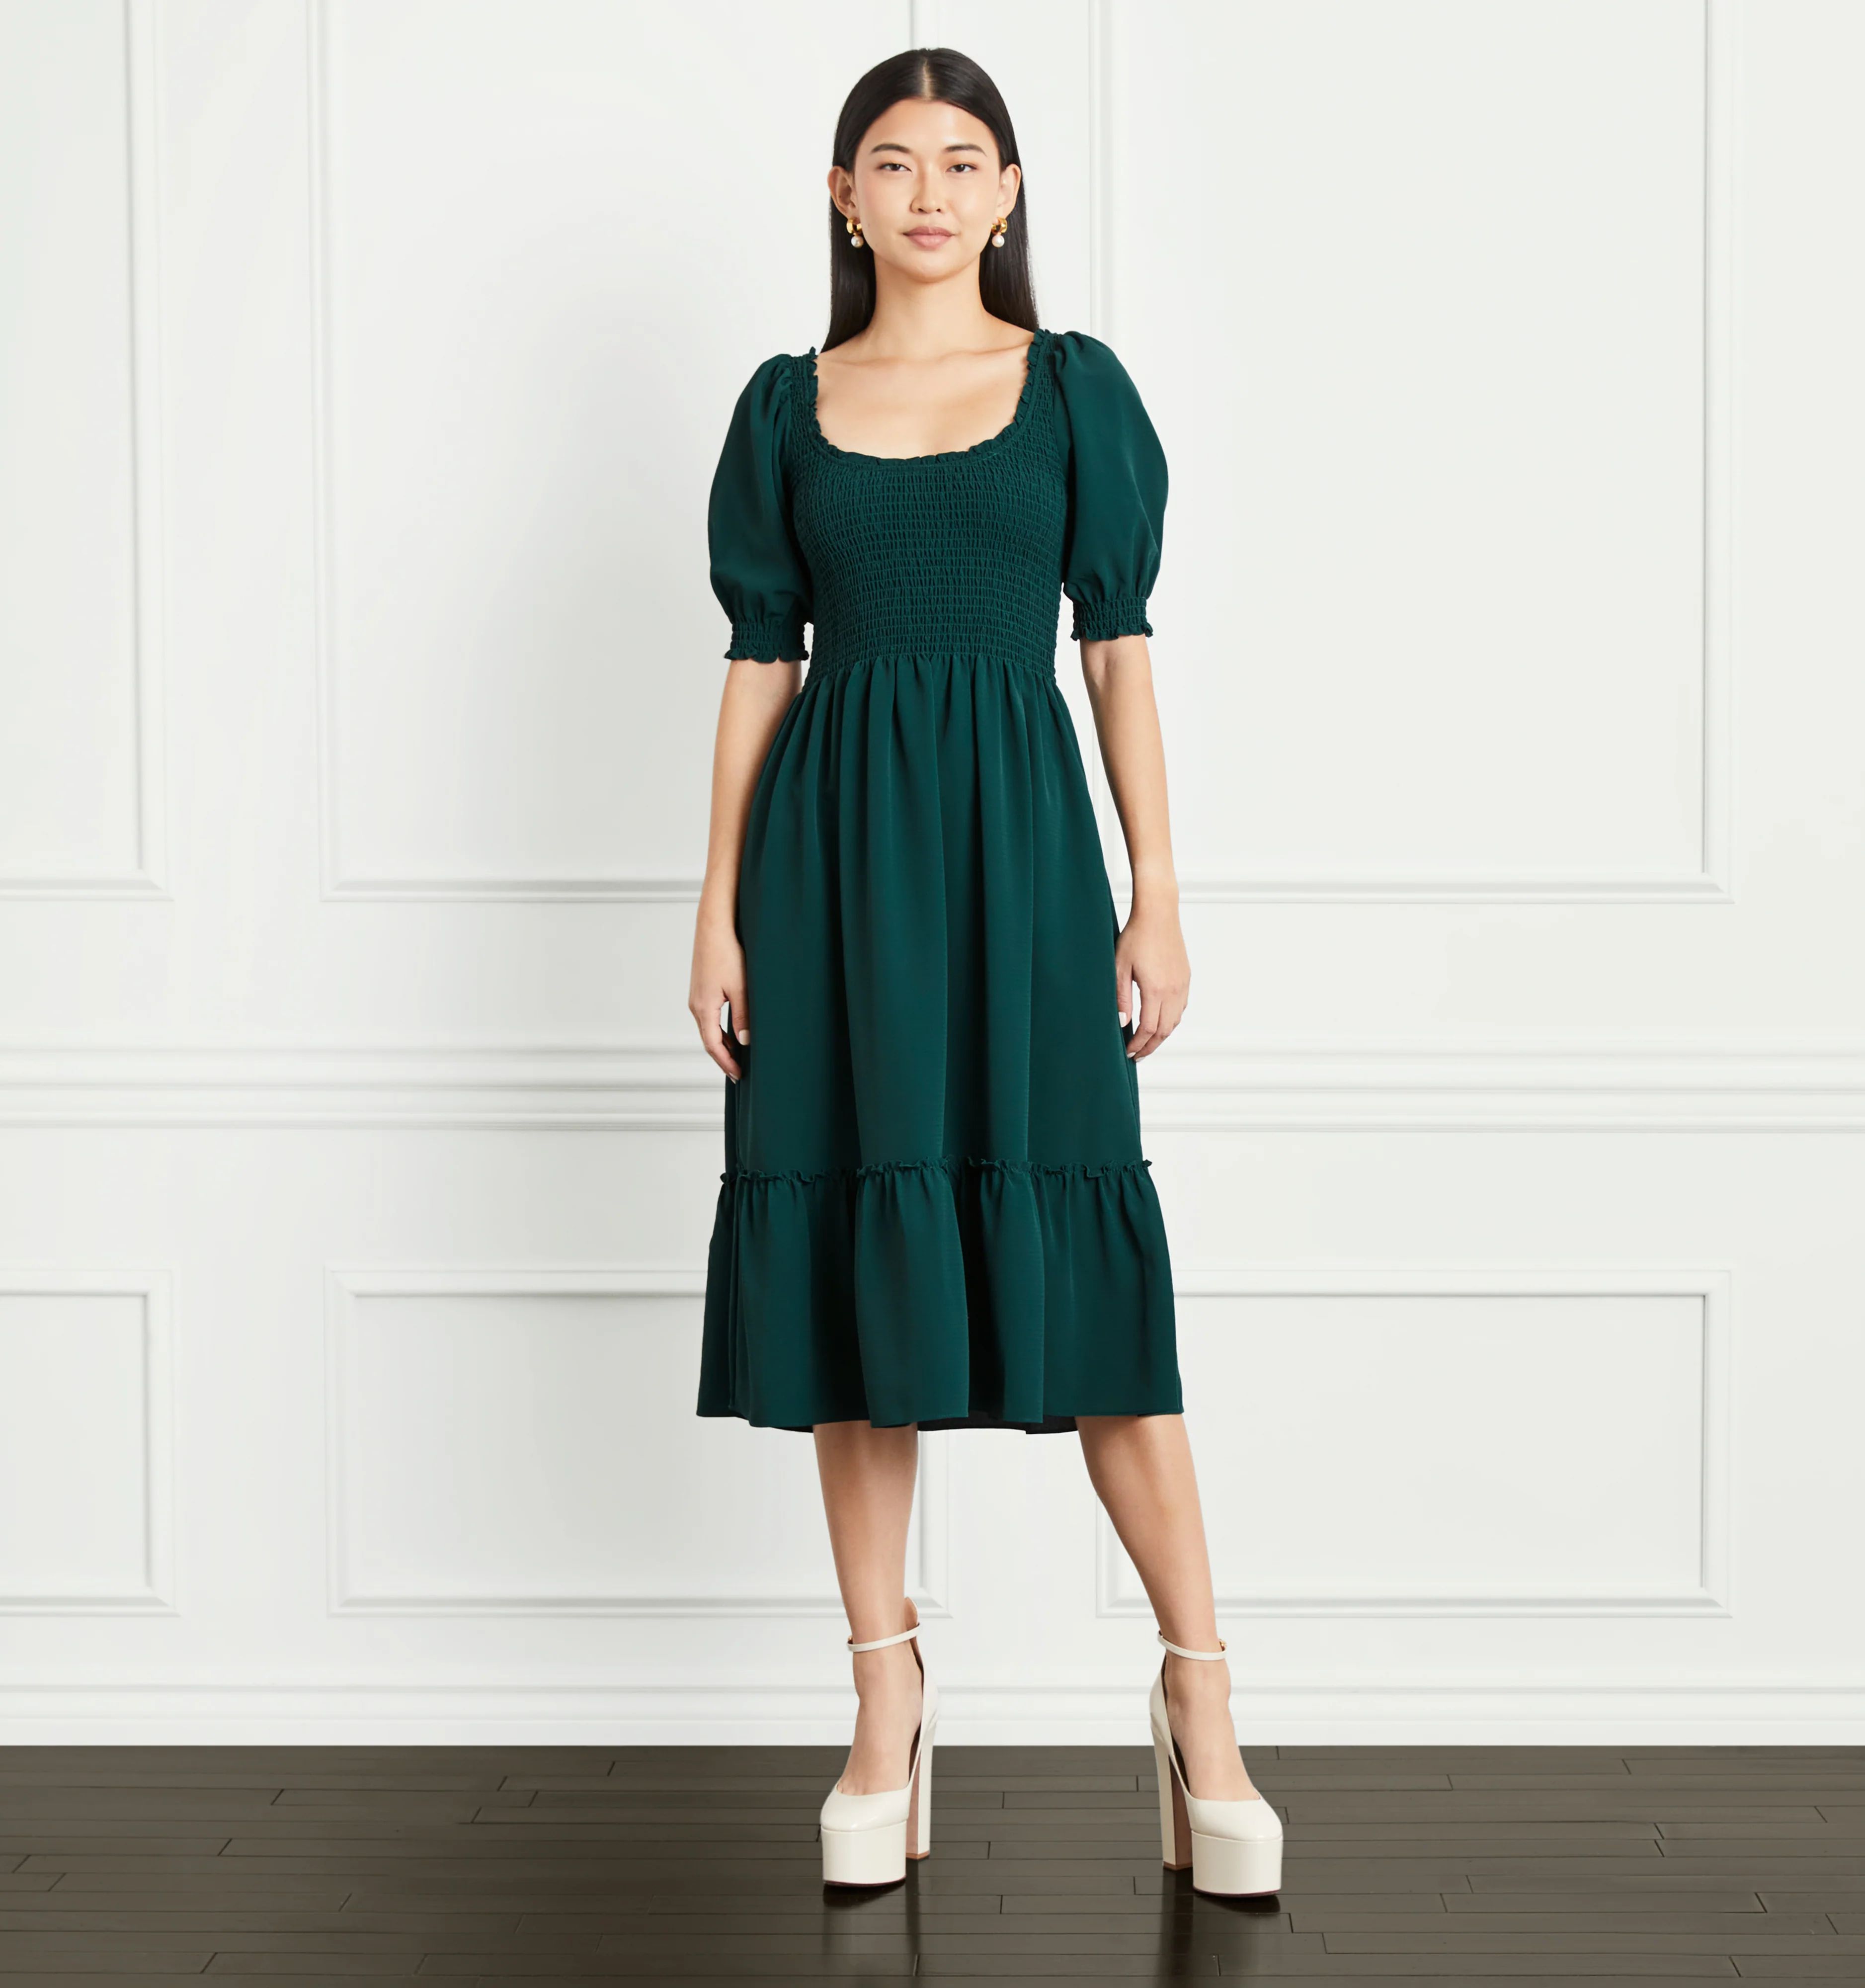 The Louisa Nap Dress - Diane Hill Multi Cotton | Hill House Home